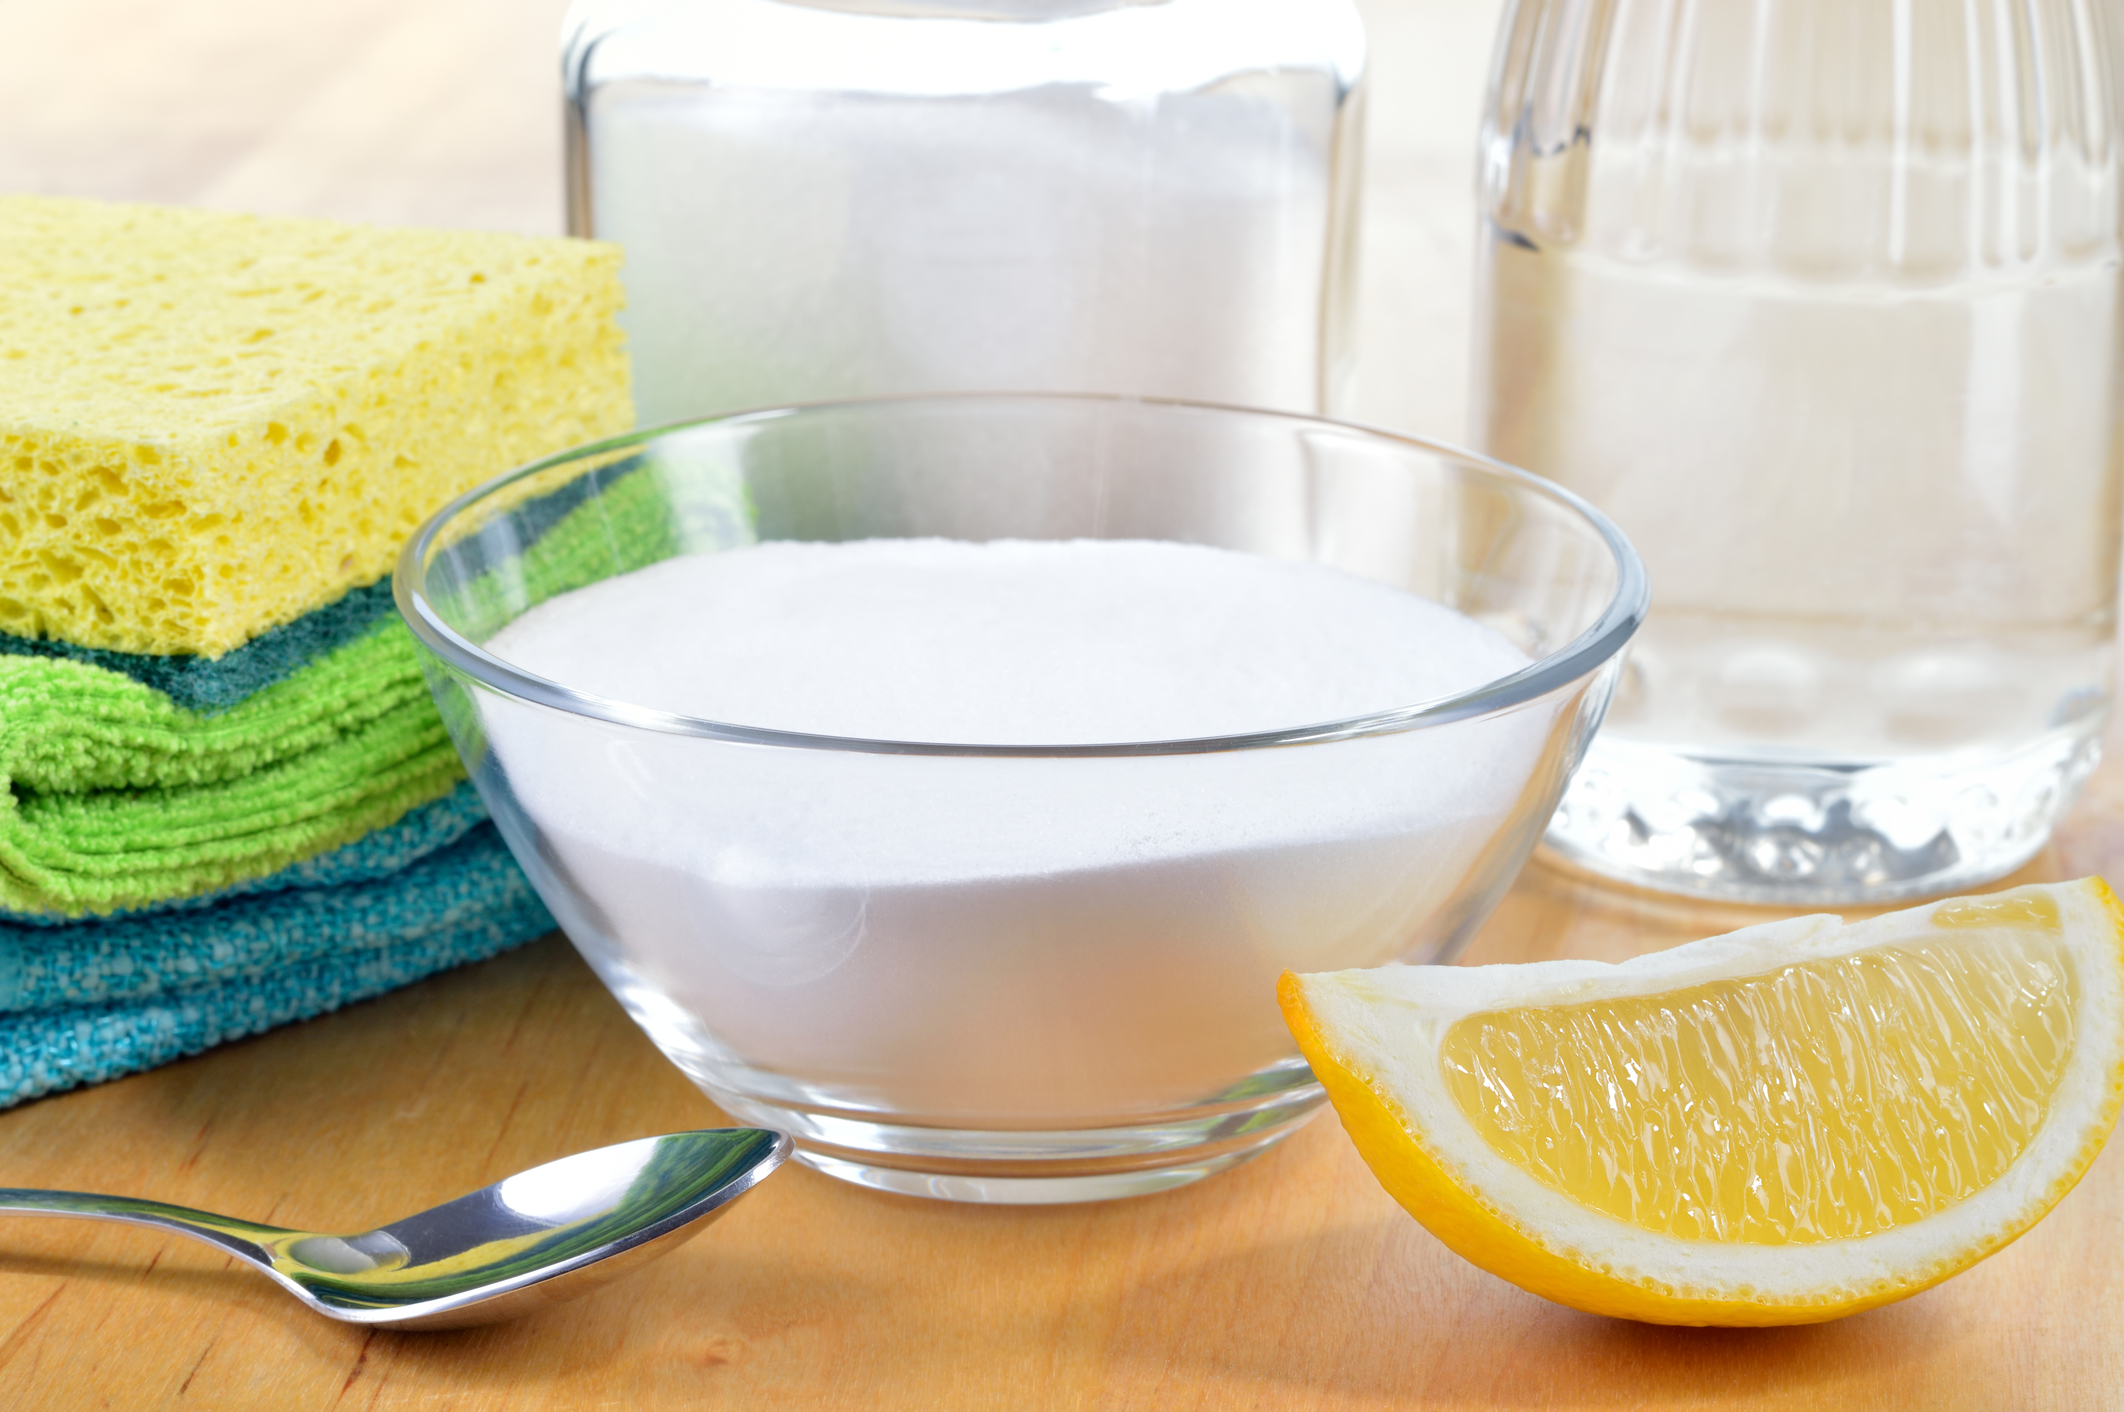 Save money by making these easy homemade cleaners